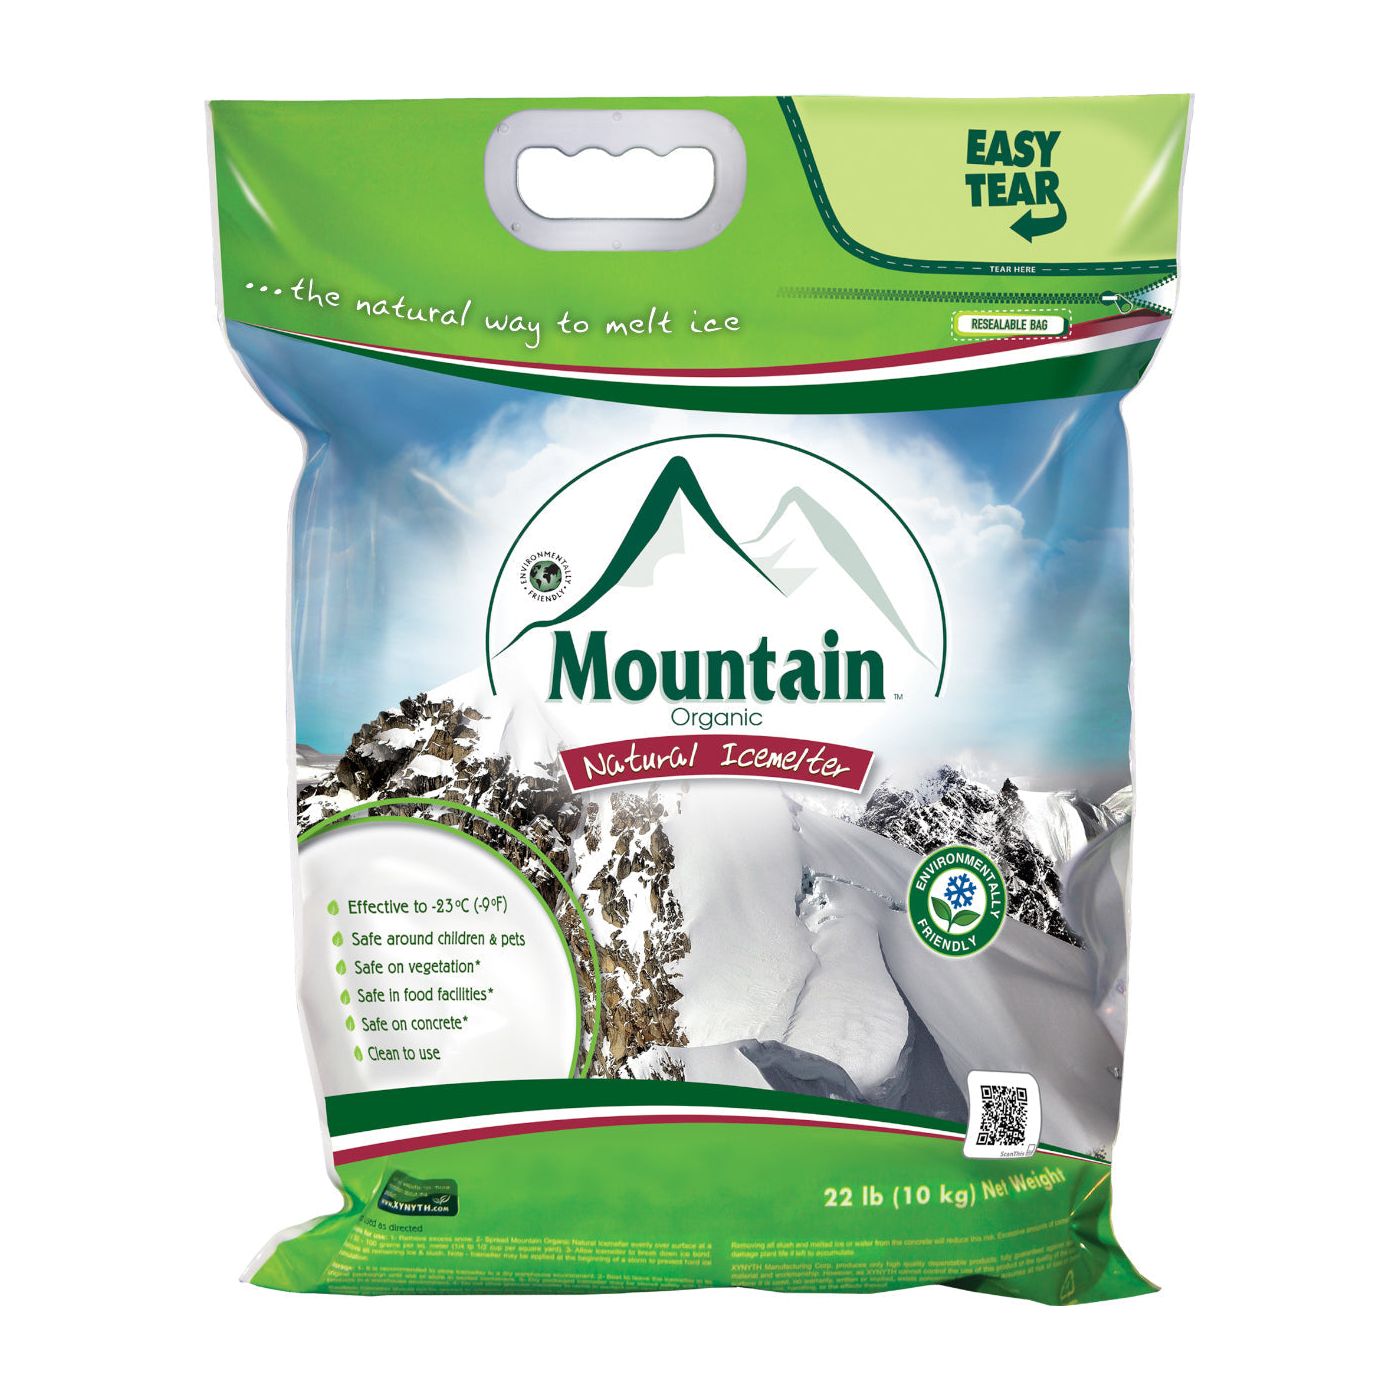 Mountain Organic Natural Icemelter Xynyth Eco-Friendly Pet-Friendly 22 lb.